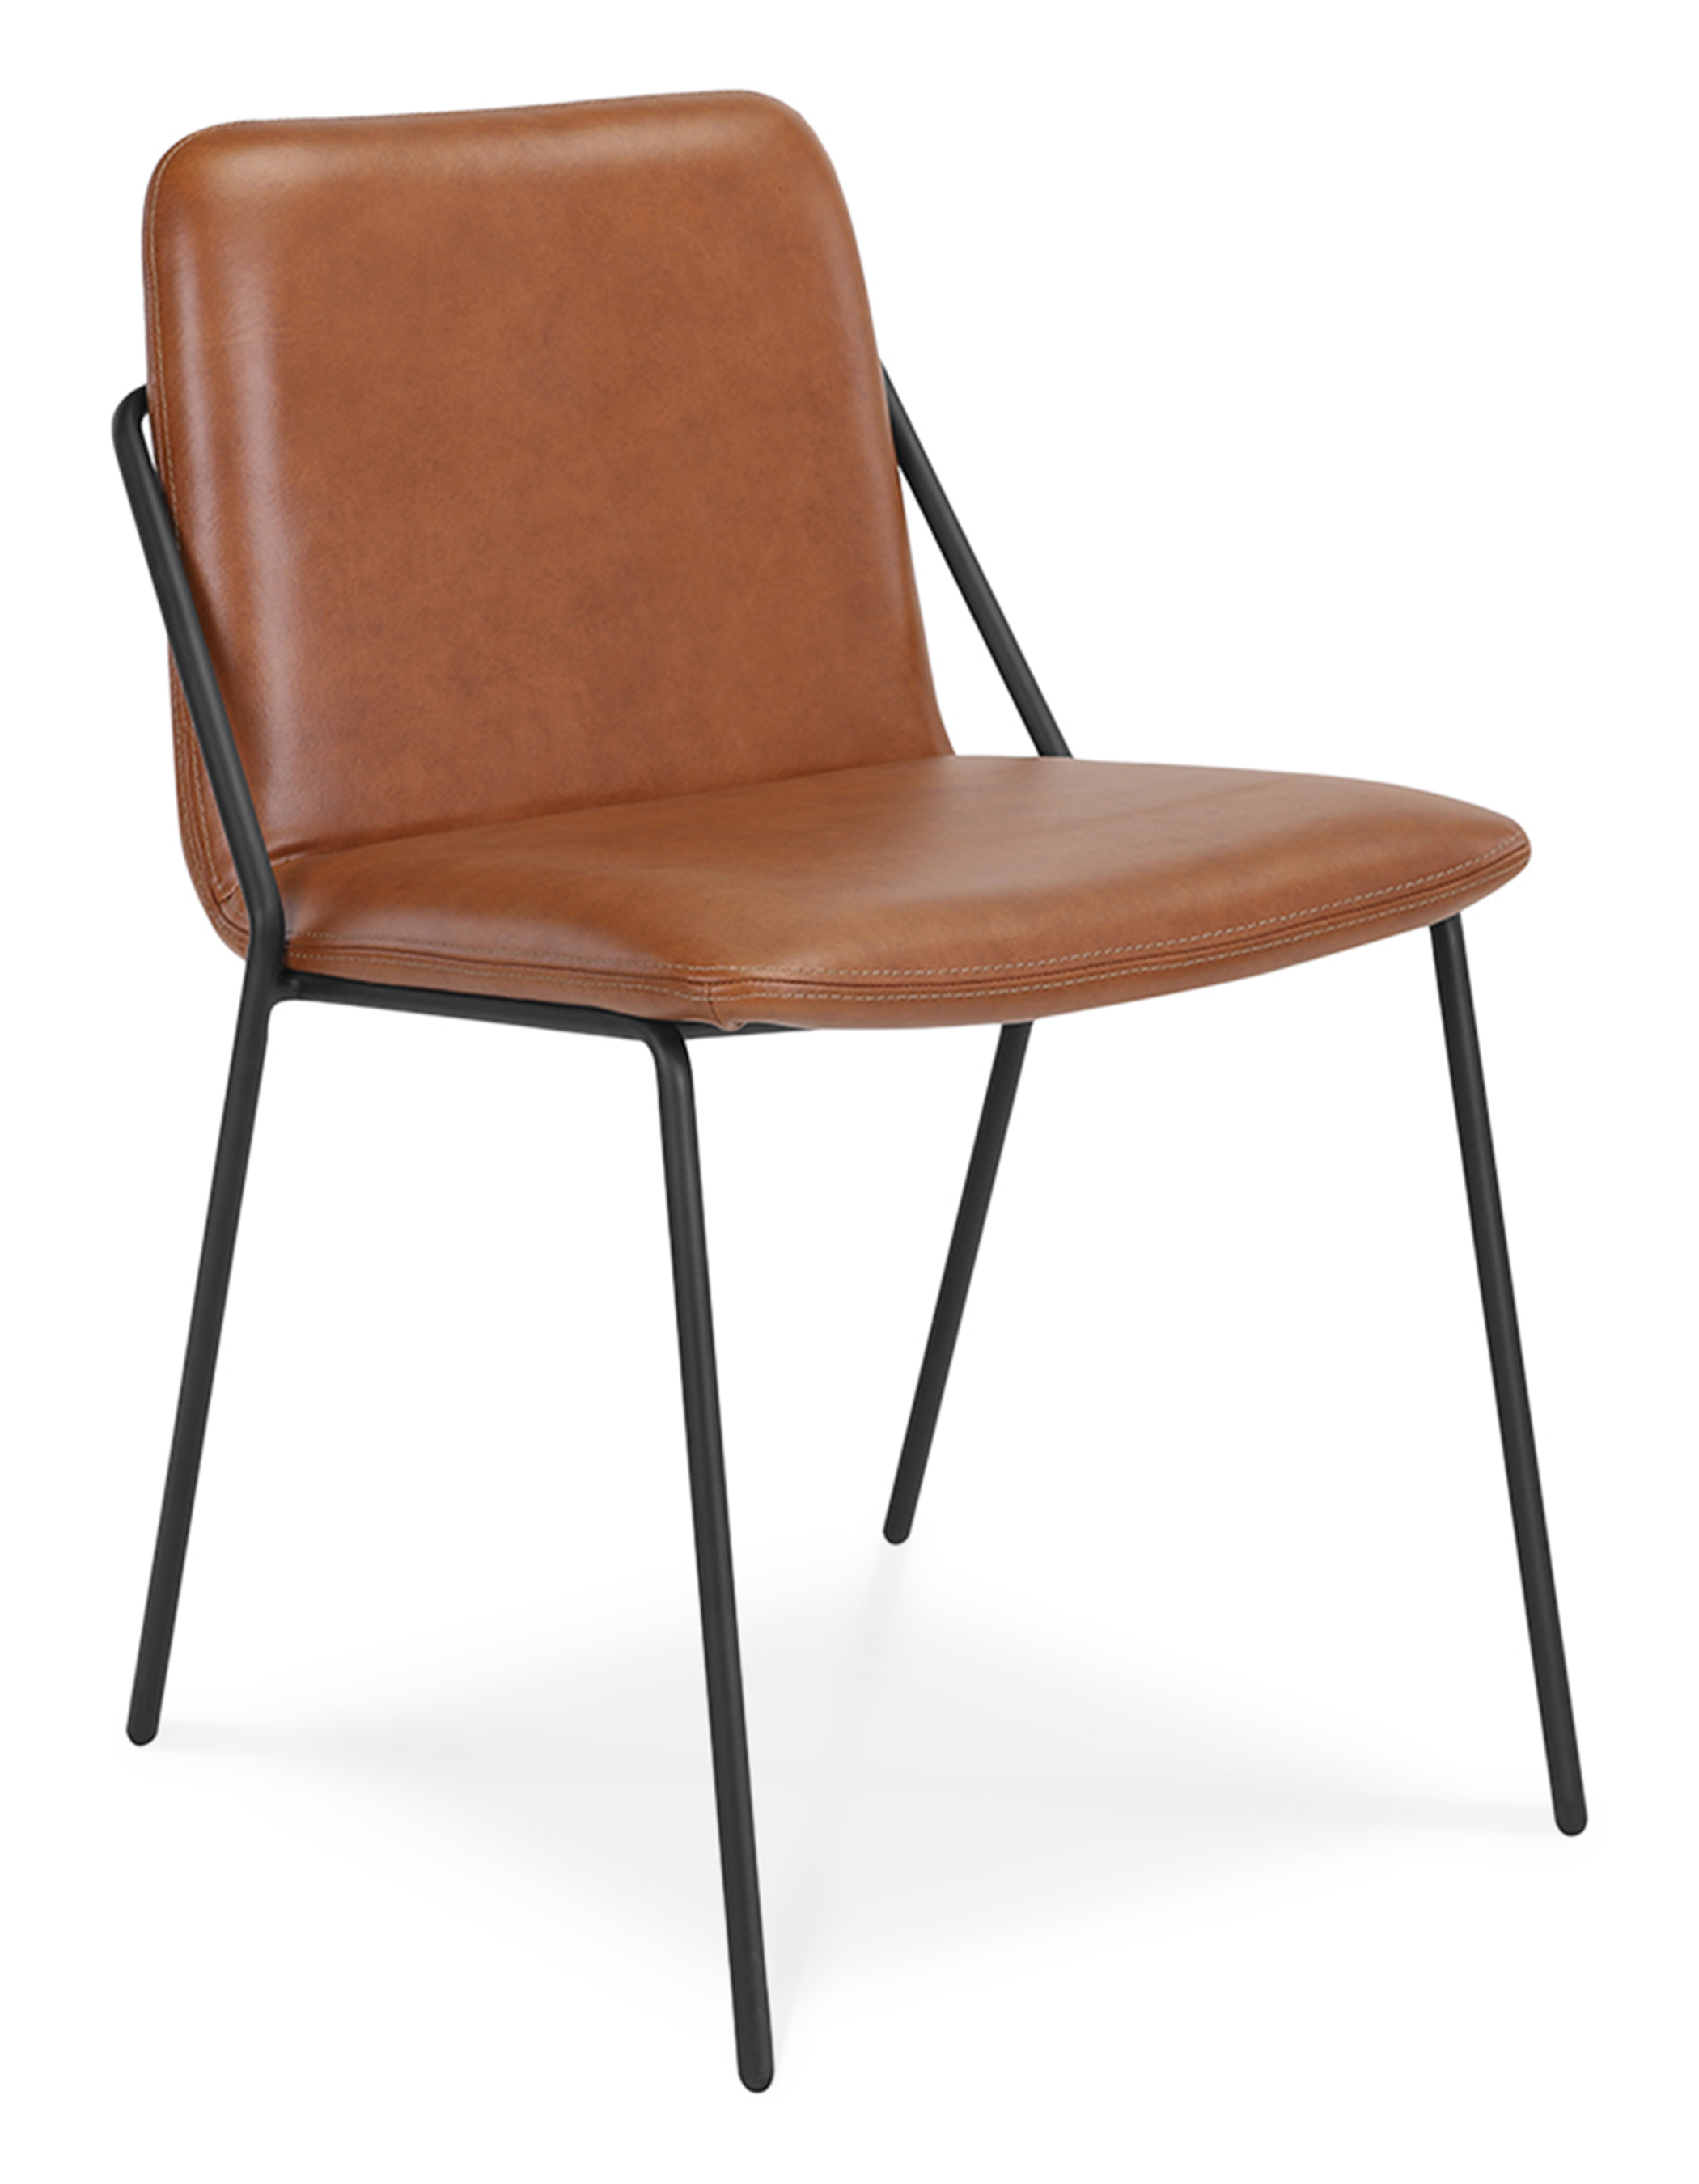 WS - Sling side chair - Upholstered PU leather (Front angle)